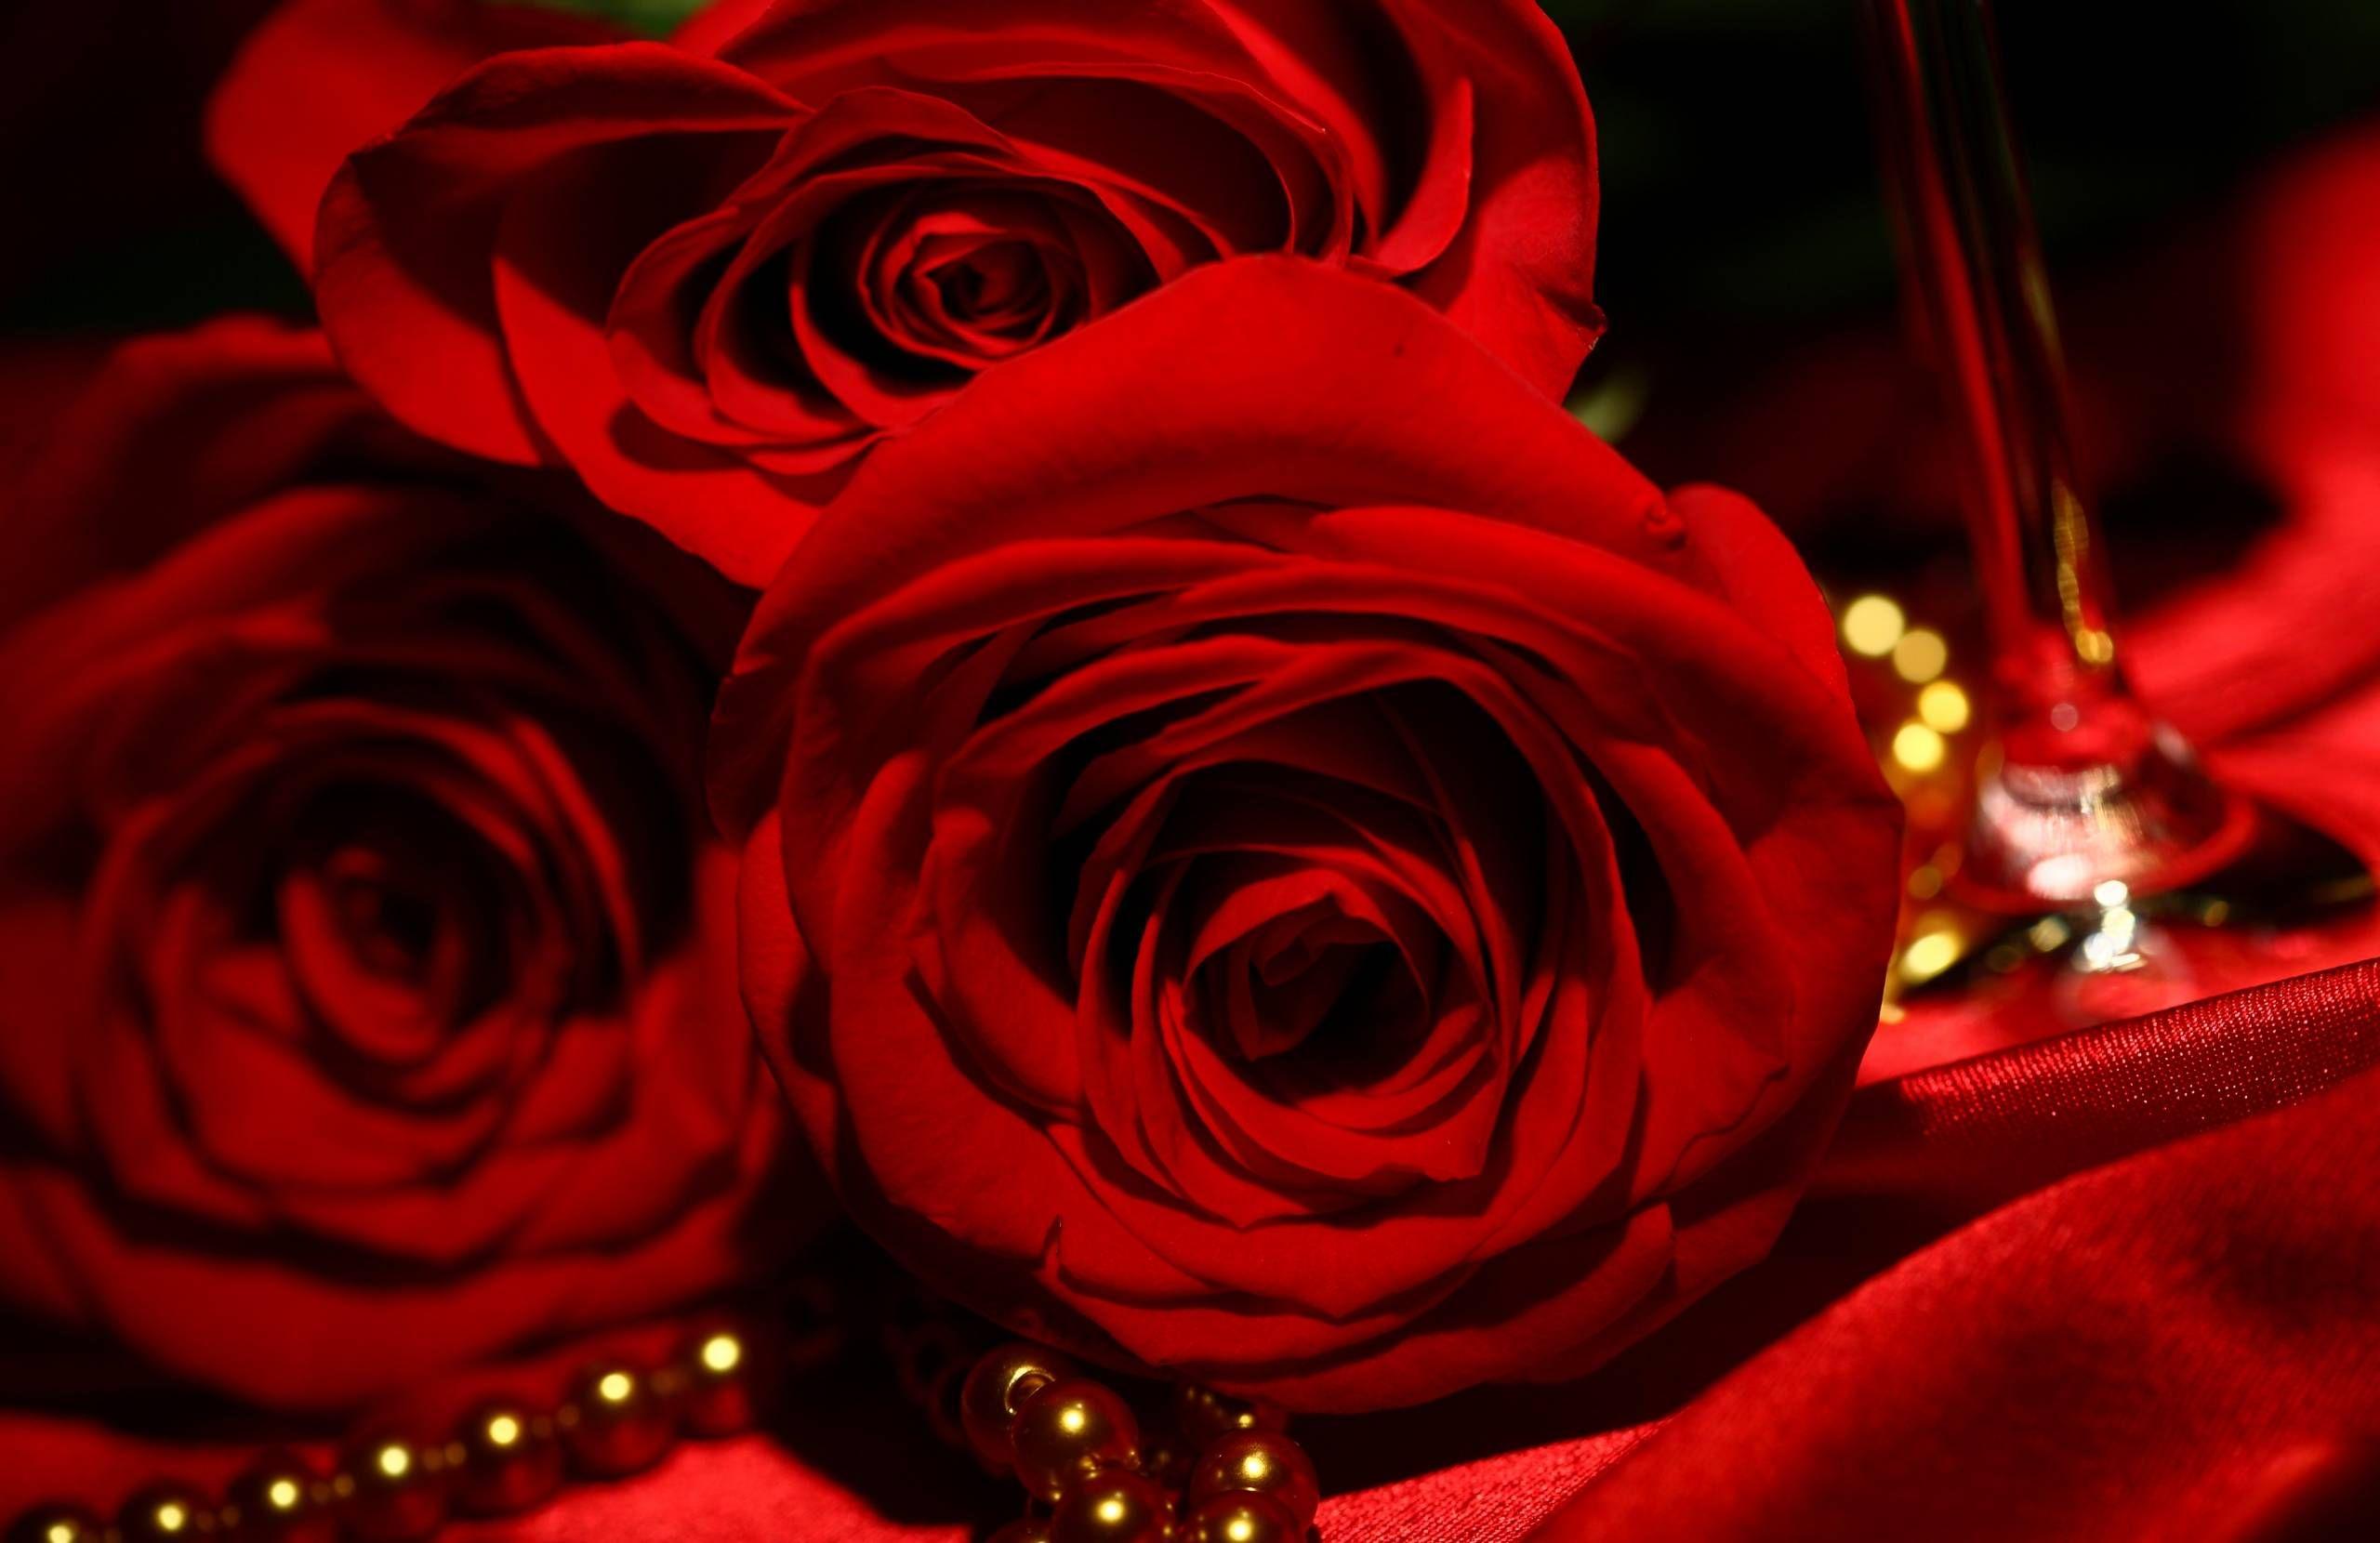 Red Roses Wallpaper Background. Red Roses HD Wallpaper, Flowers